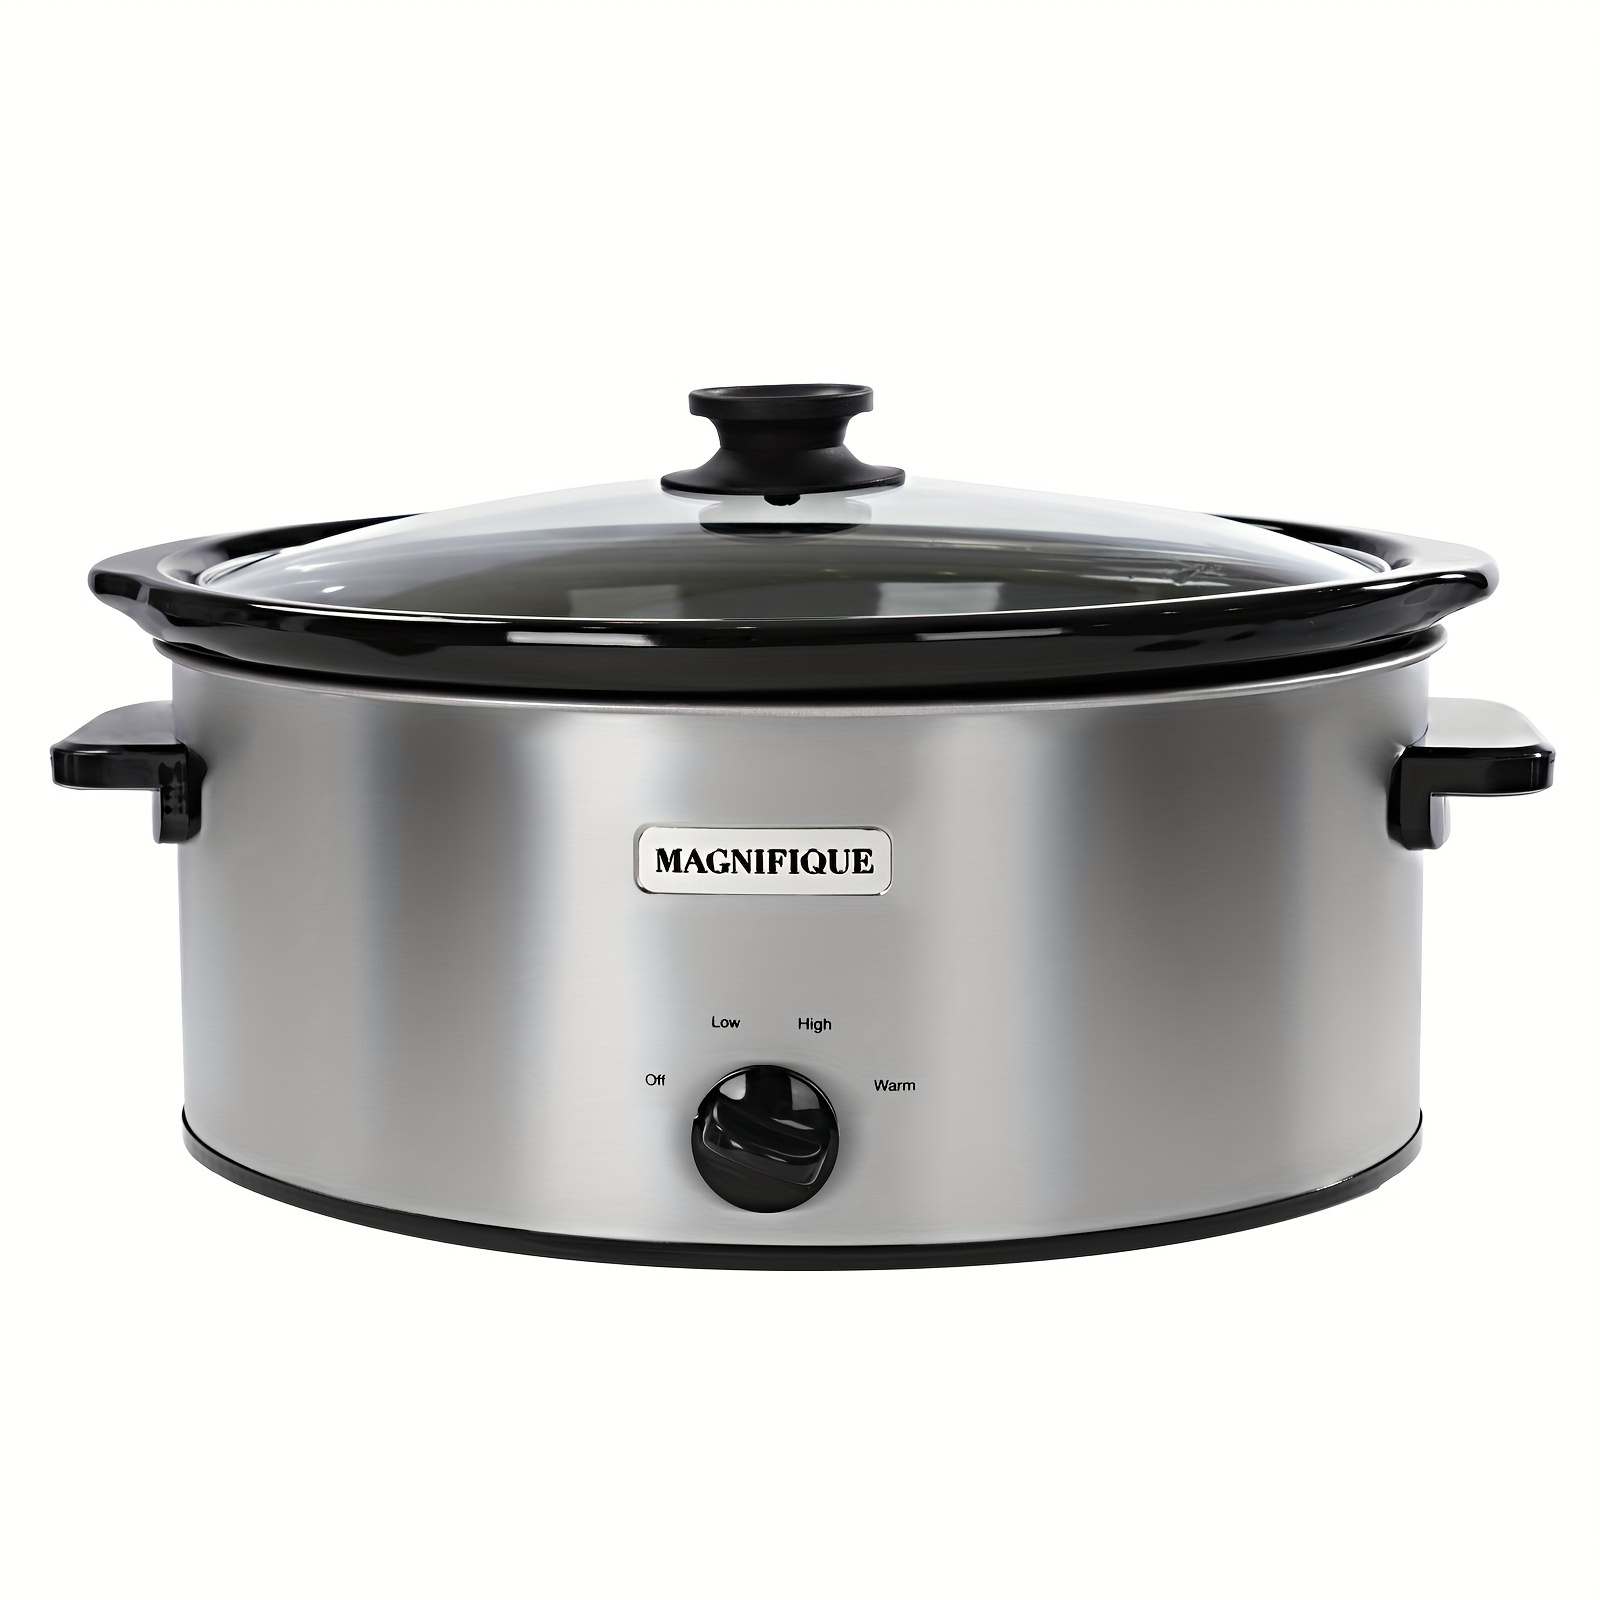 

1pc, Magnifique 6 Quart Slow Cooker Oval Manual Pot Food Warmer With 3 Cooking Settings, Stainless Steel, Home Supplies